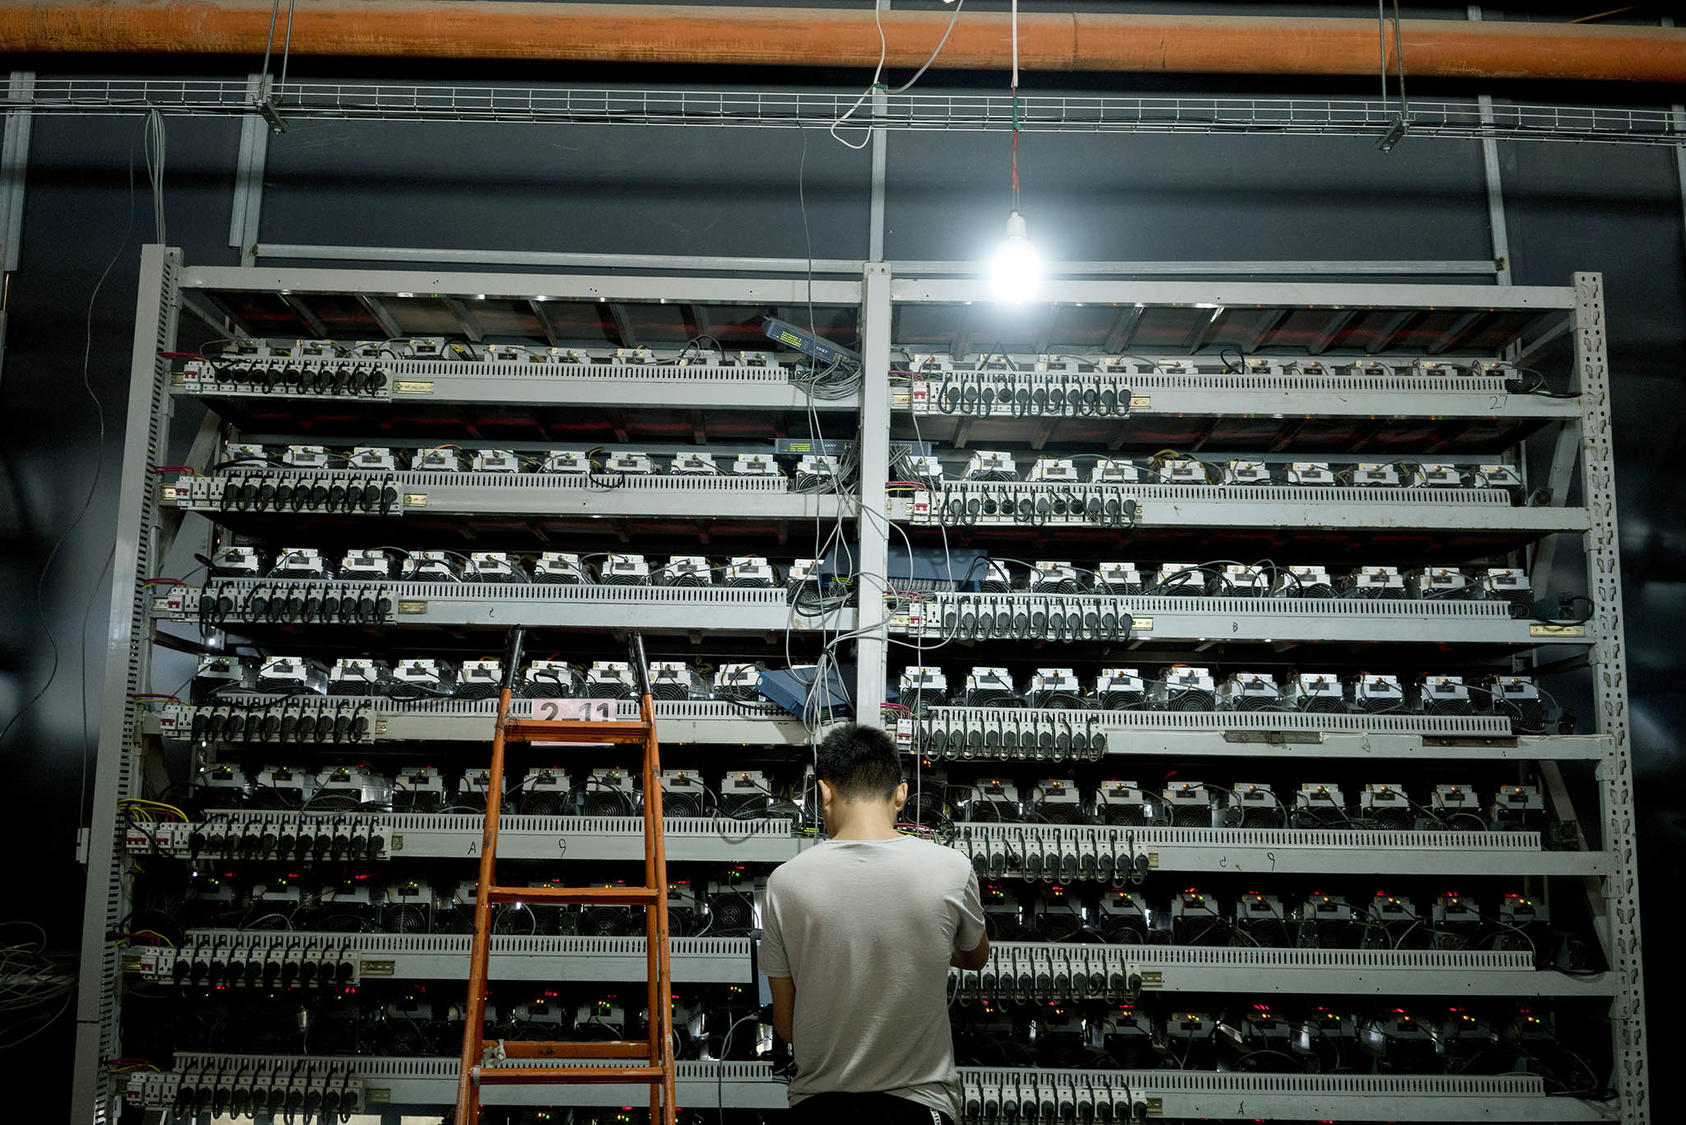 A Bitcoin mining operation in the Chinese region of Inner Mongolia on Aug. 11, 2017. (Giulia Marchi/The New York Times)